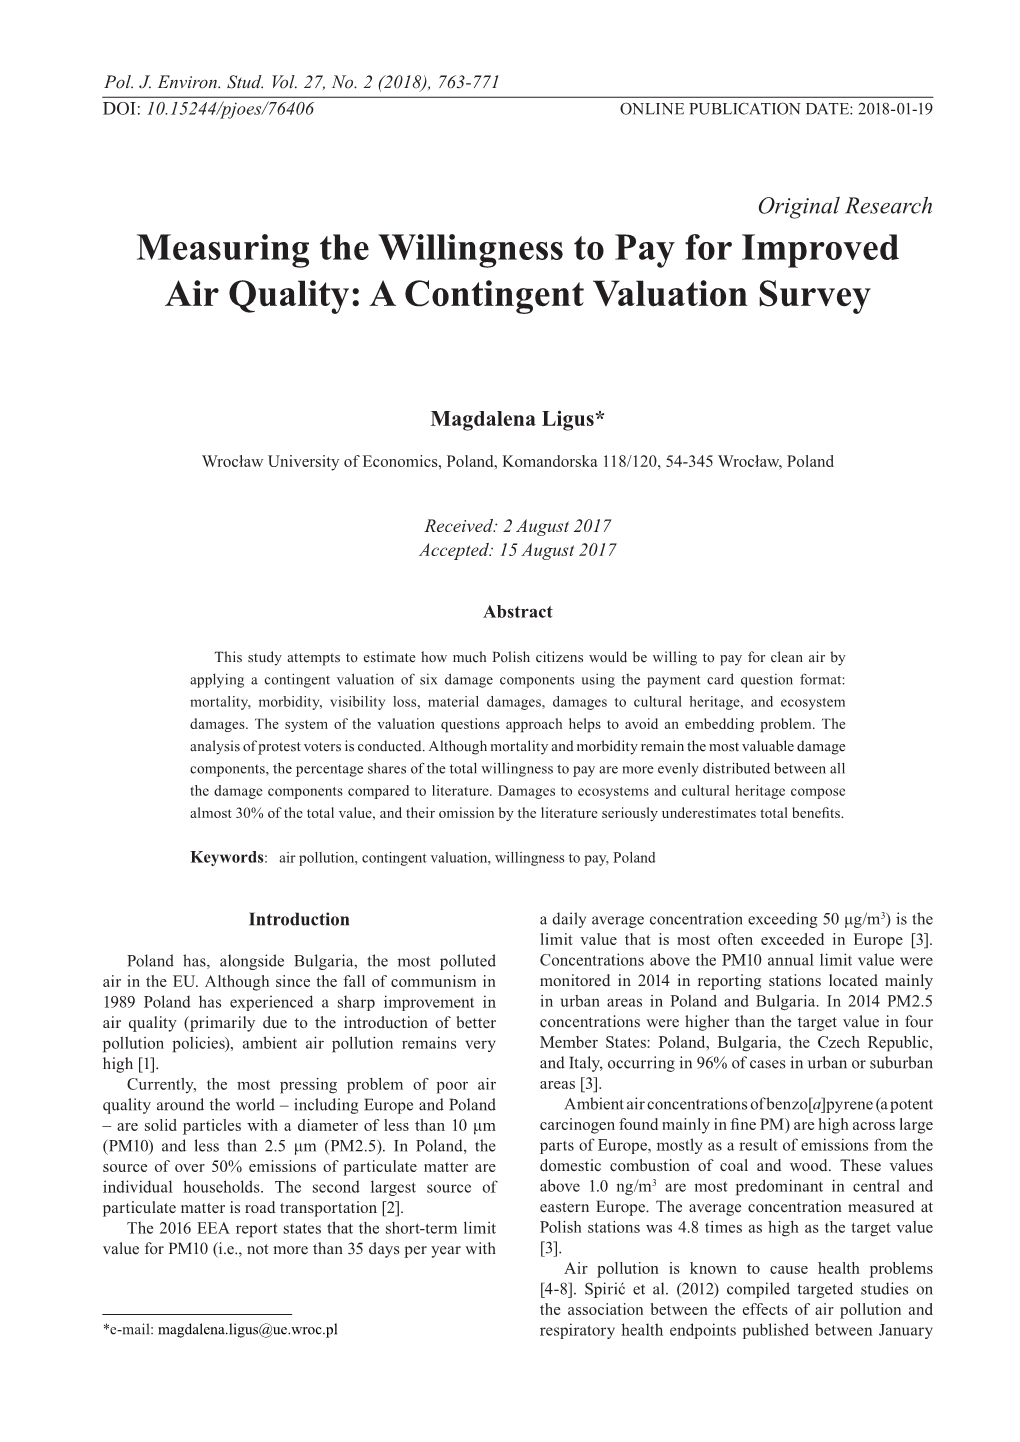 Measuring the Willingness to Pay for Improved Air Quality: a Contingent Valuation Survey